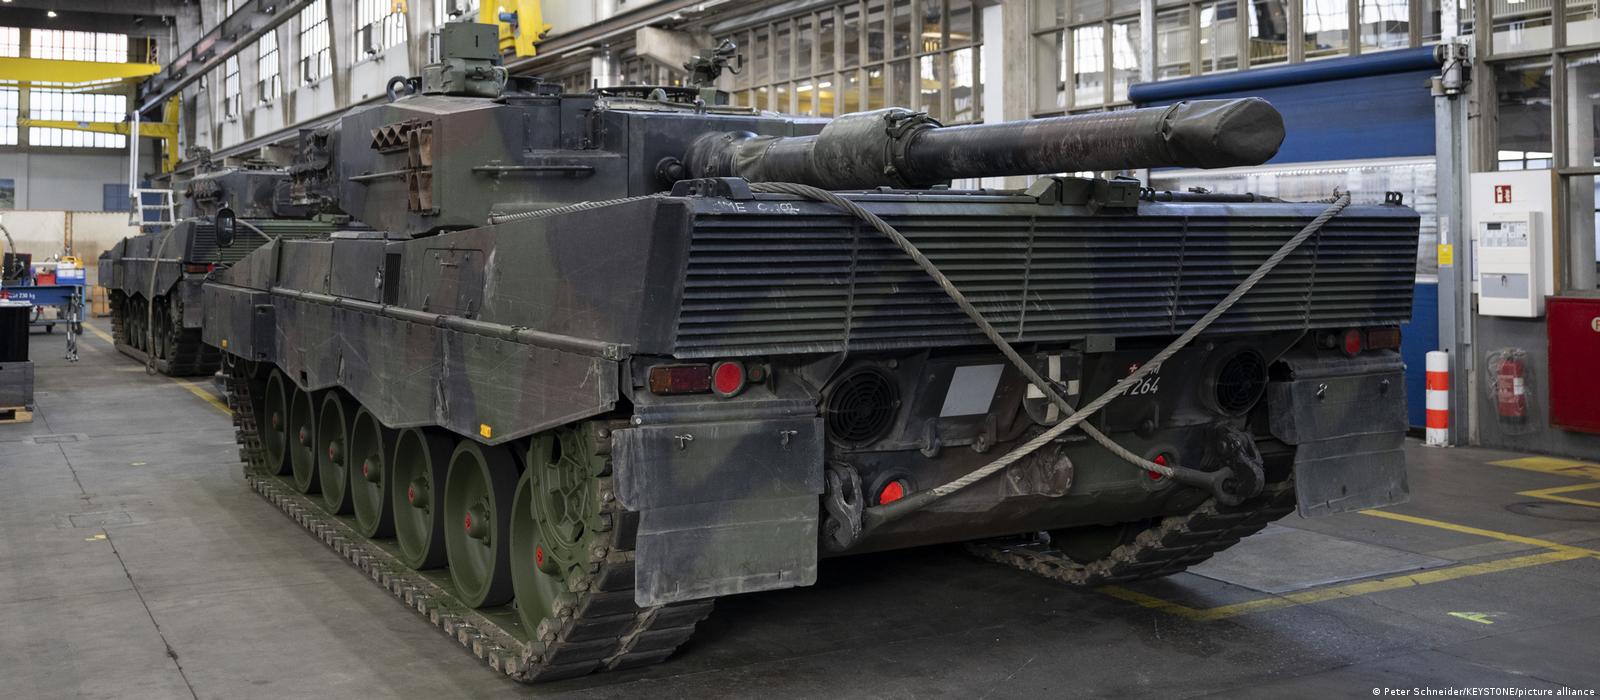 Switzerland Backs Sale of 25 Leopard Tanks to Germany to Support